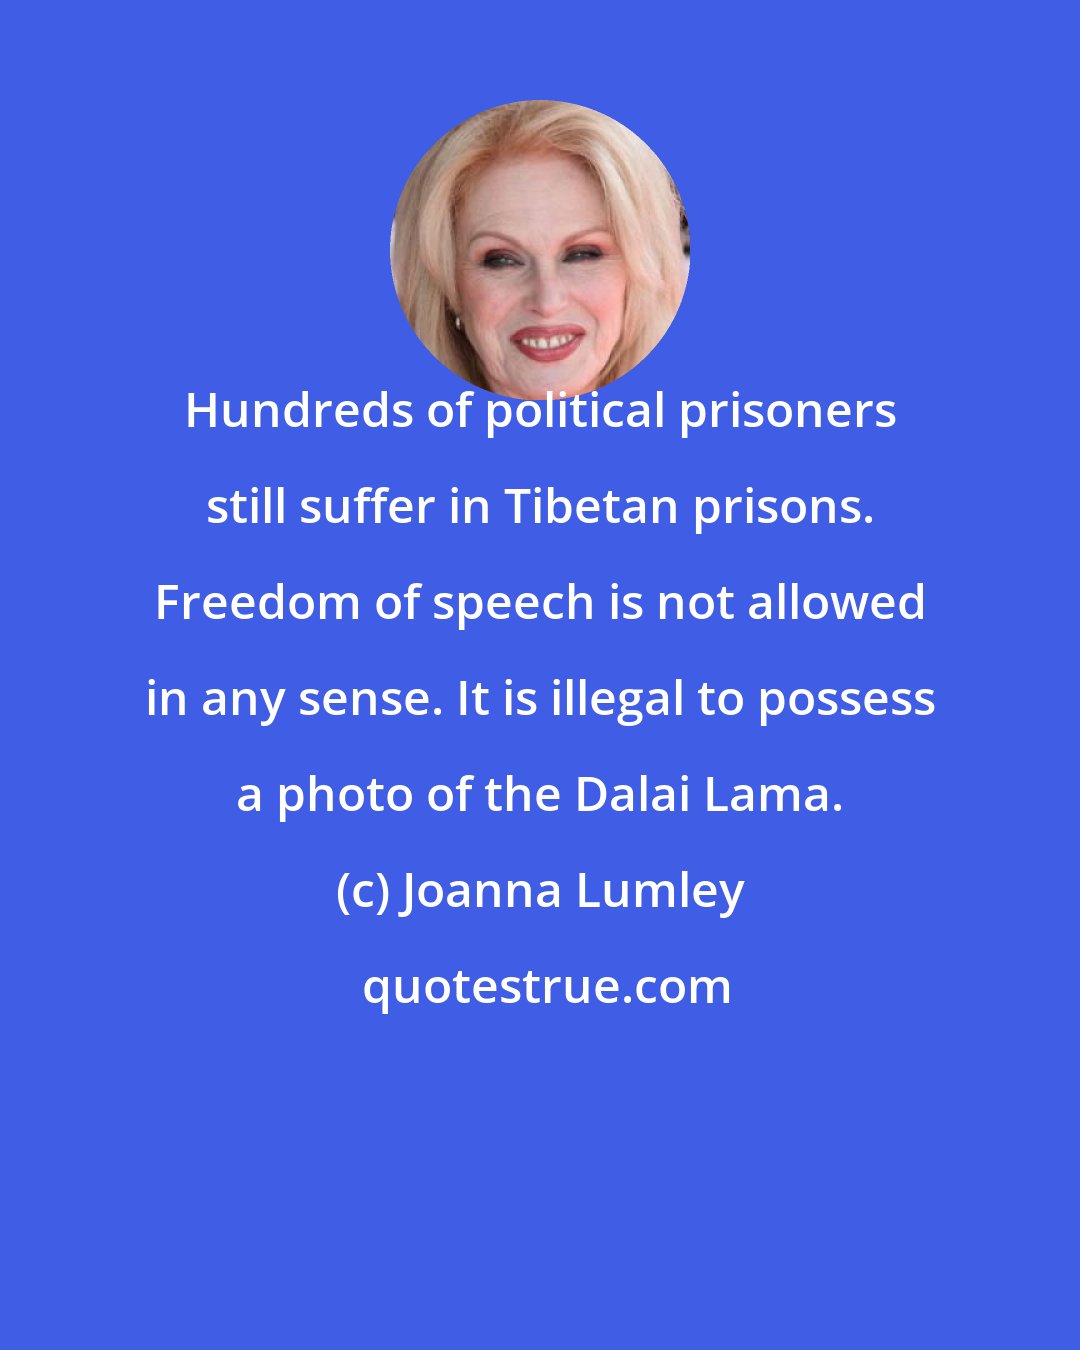 Joanna Lumley: Hundreds of political prisoners still suffer in Tibetan prisons. Freedom of speech is not allowed in any sense. It is illegal to possess a photo of the Dalai Lama.